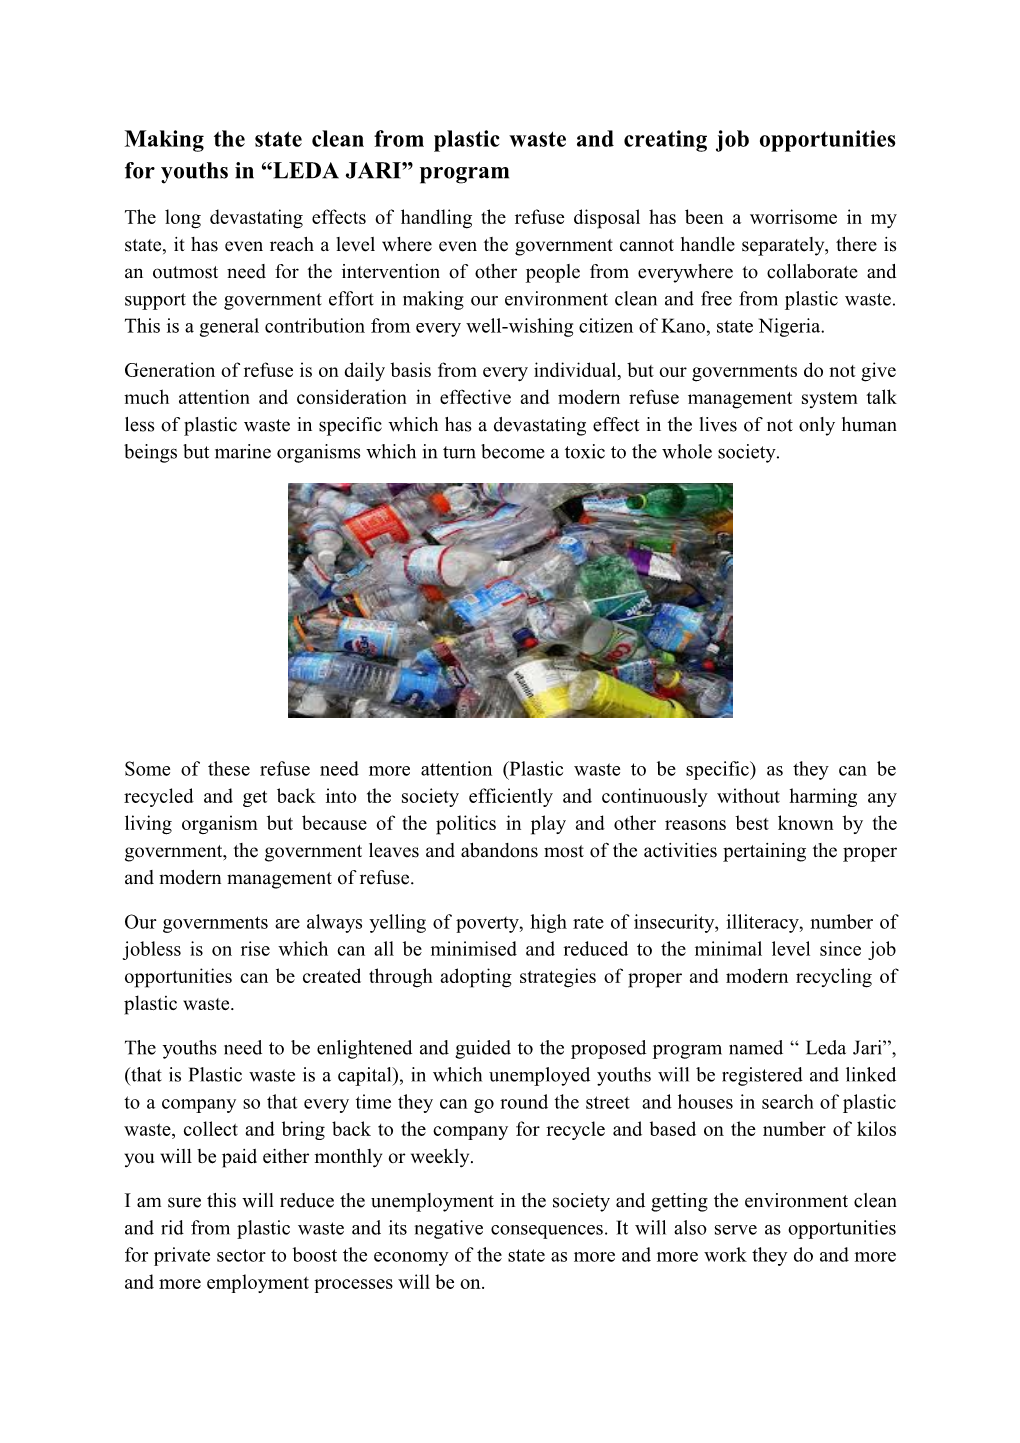 Making the State Clean from Plastic Waste and Creating Job Opportunities for Youths In